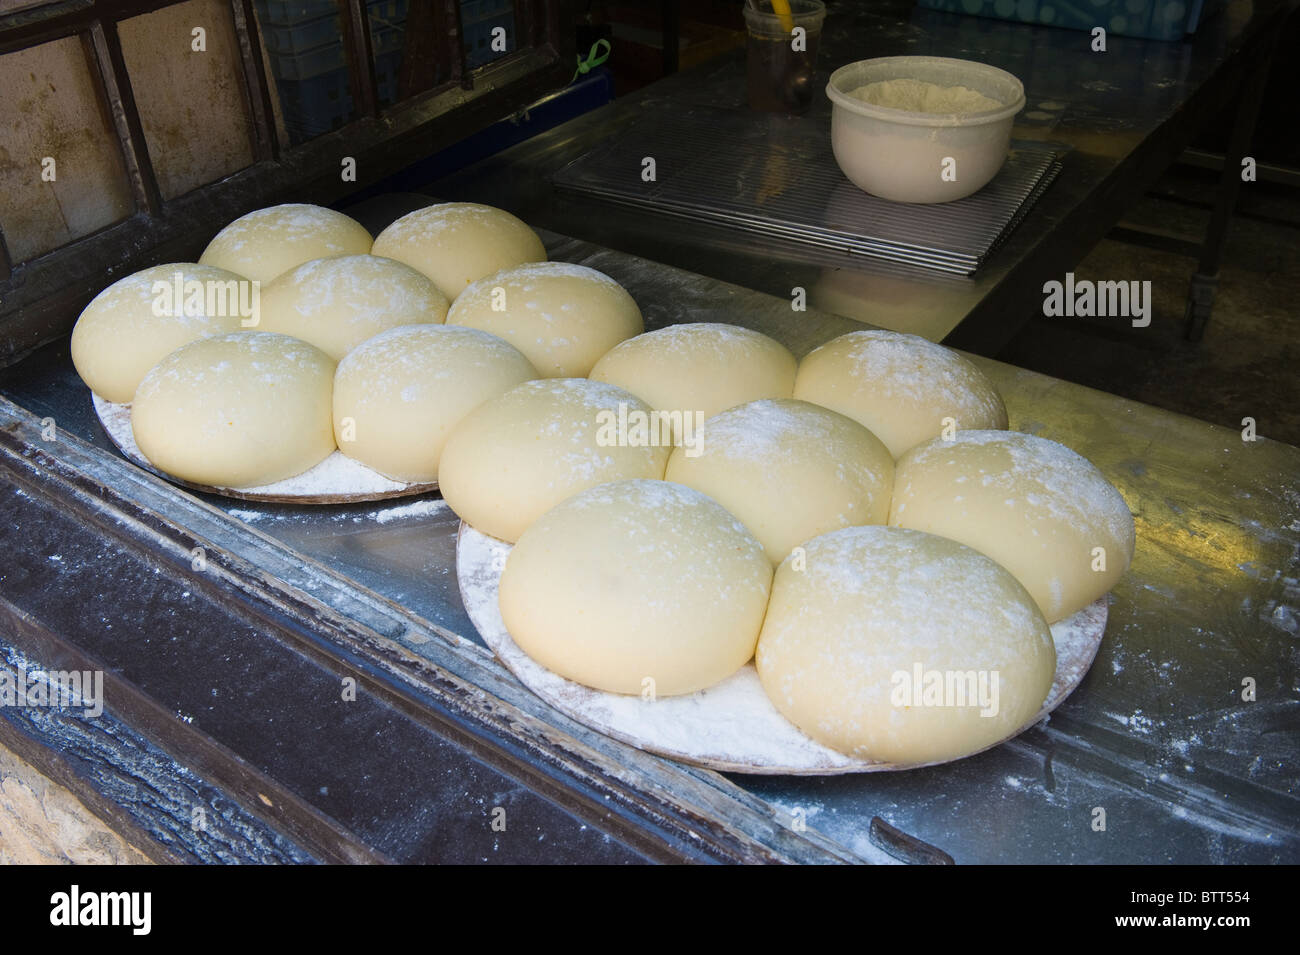 Galettes de Perouges, pastry baker’s yeast, Medieval walled town of Perouges, France Stock Photo